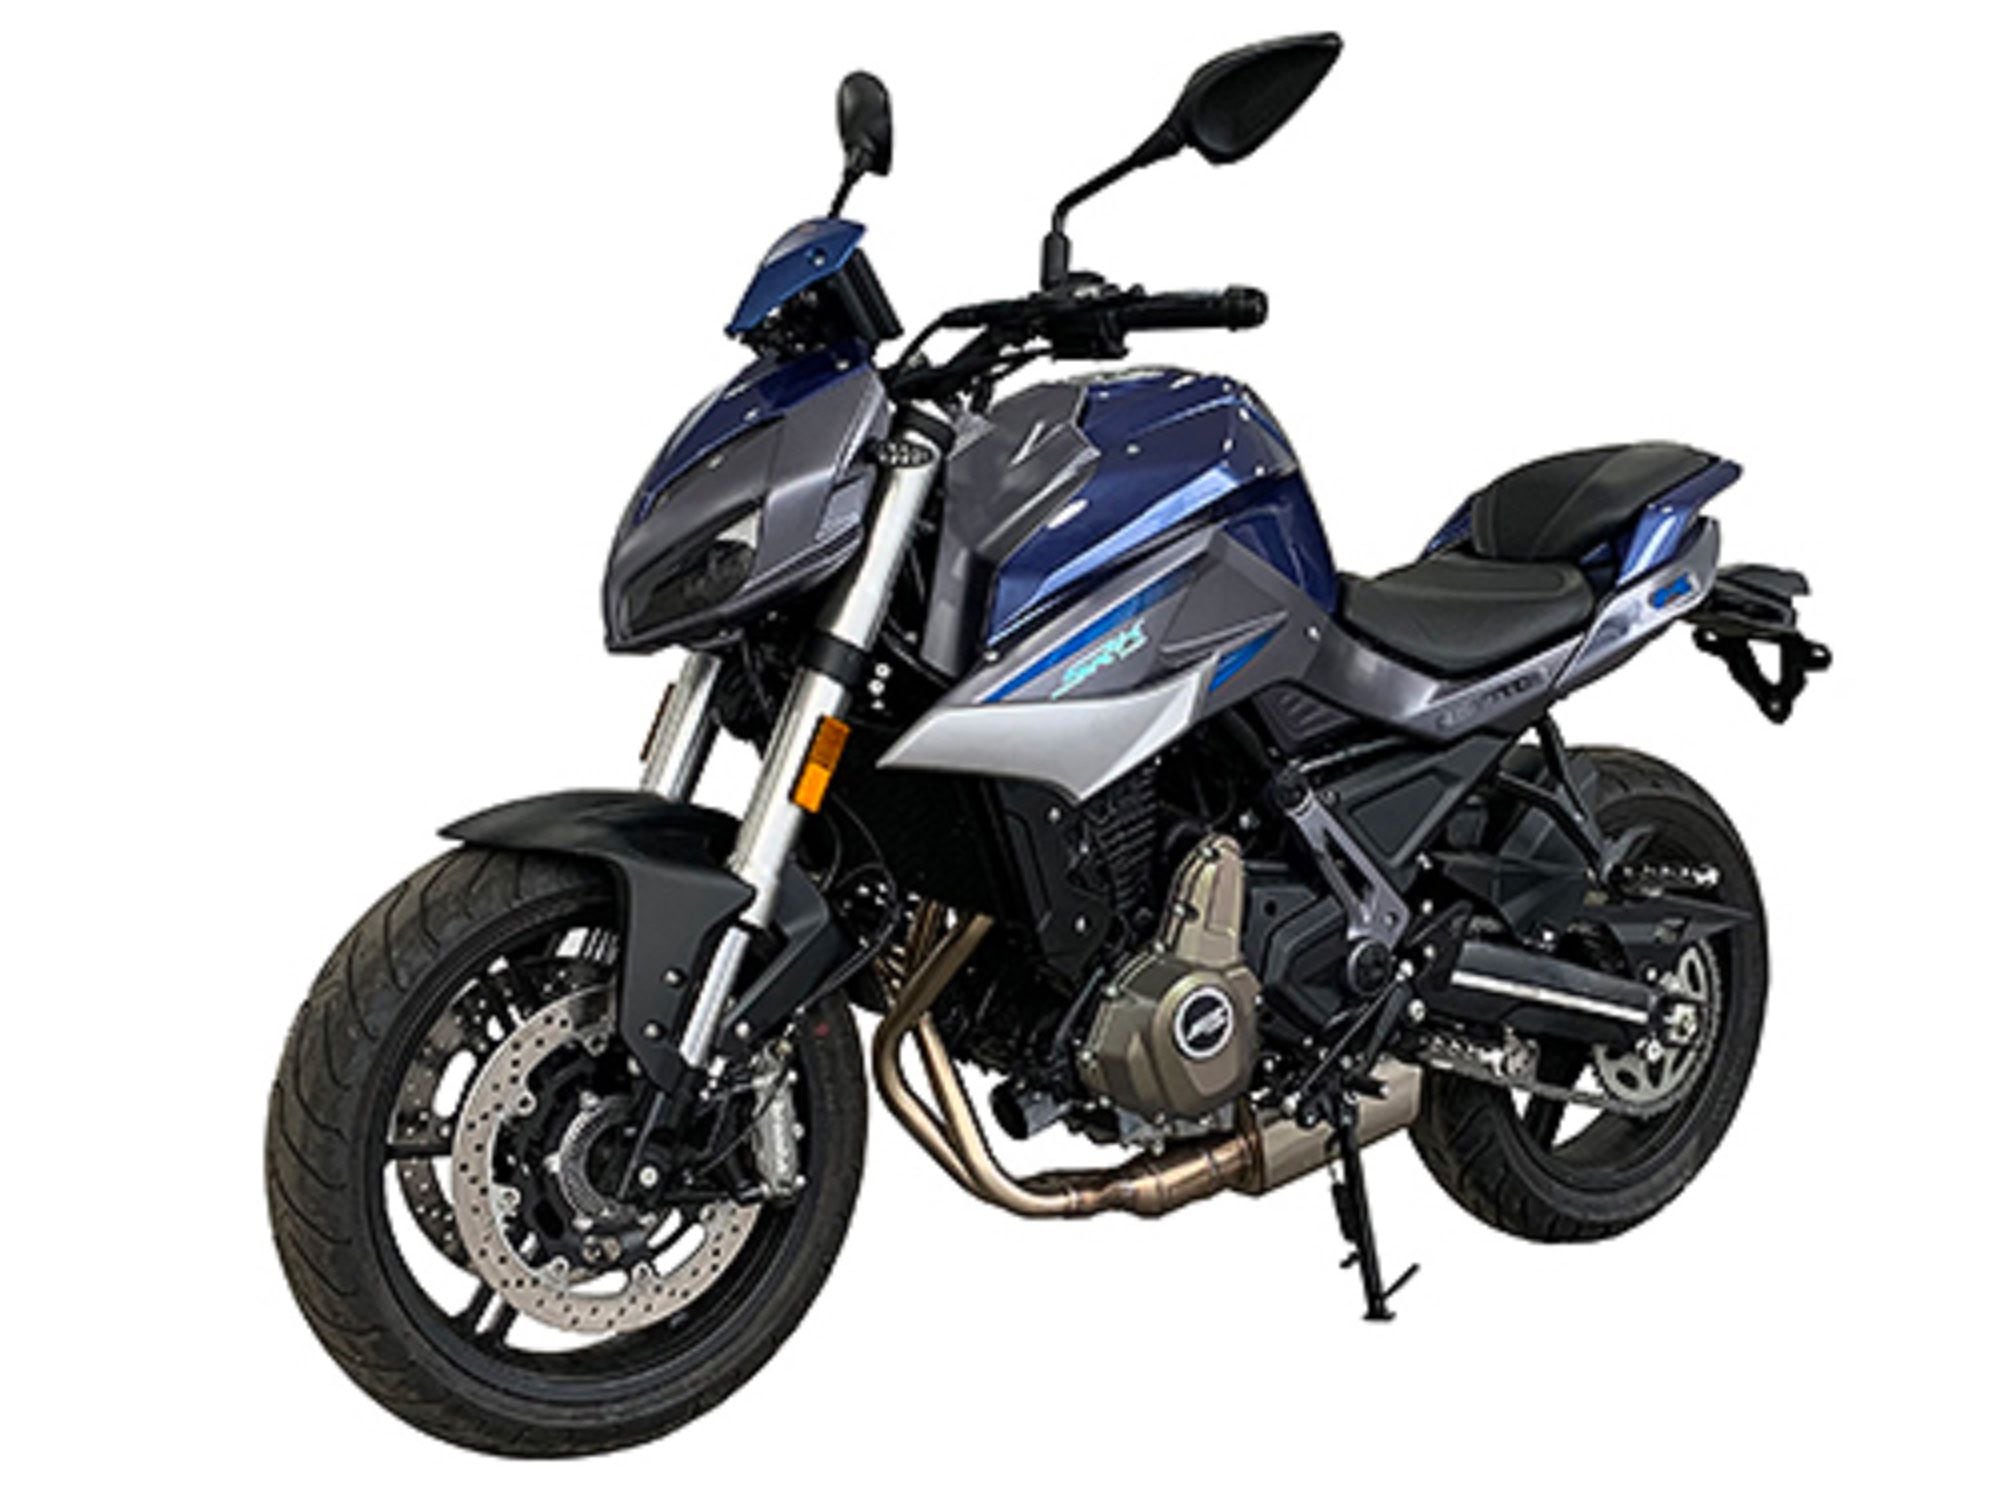 The other new image shows a naked SRK700, which uses a 693cc parallel-twin motor.